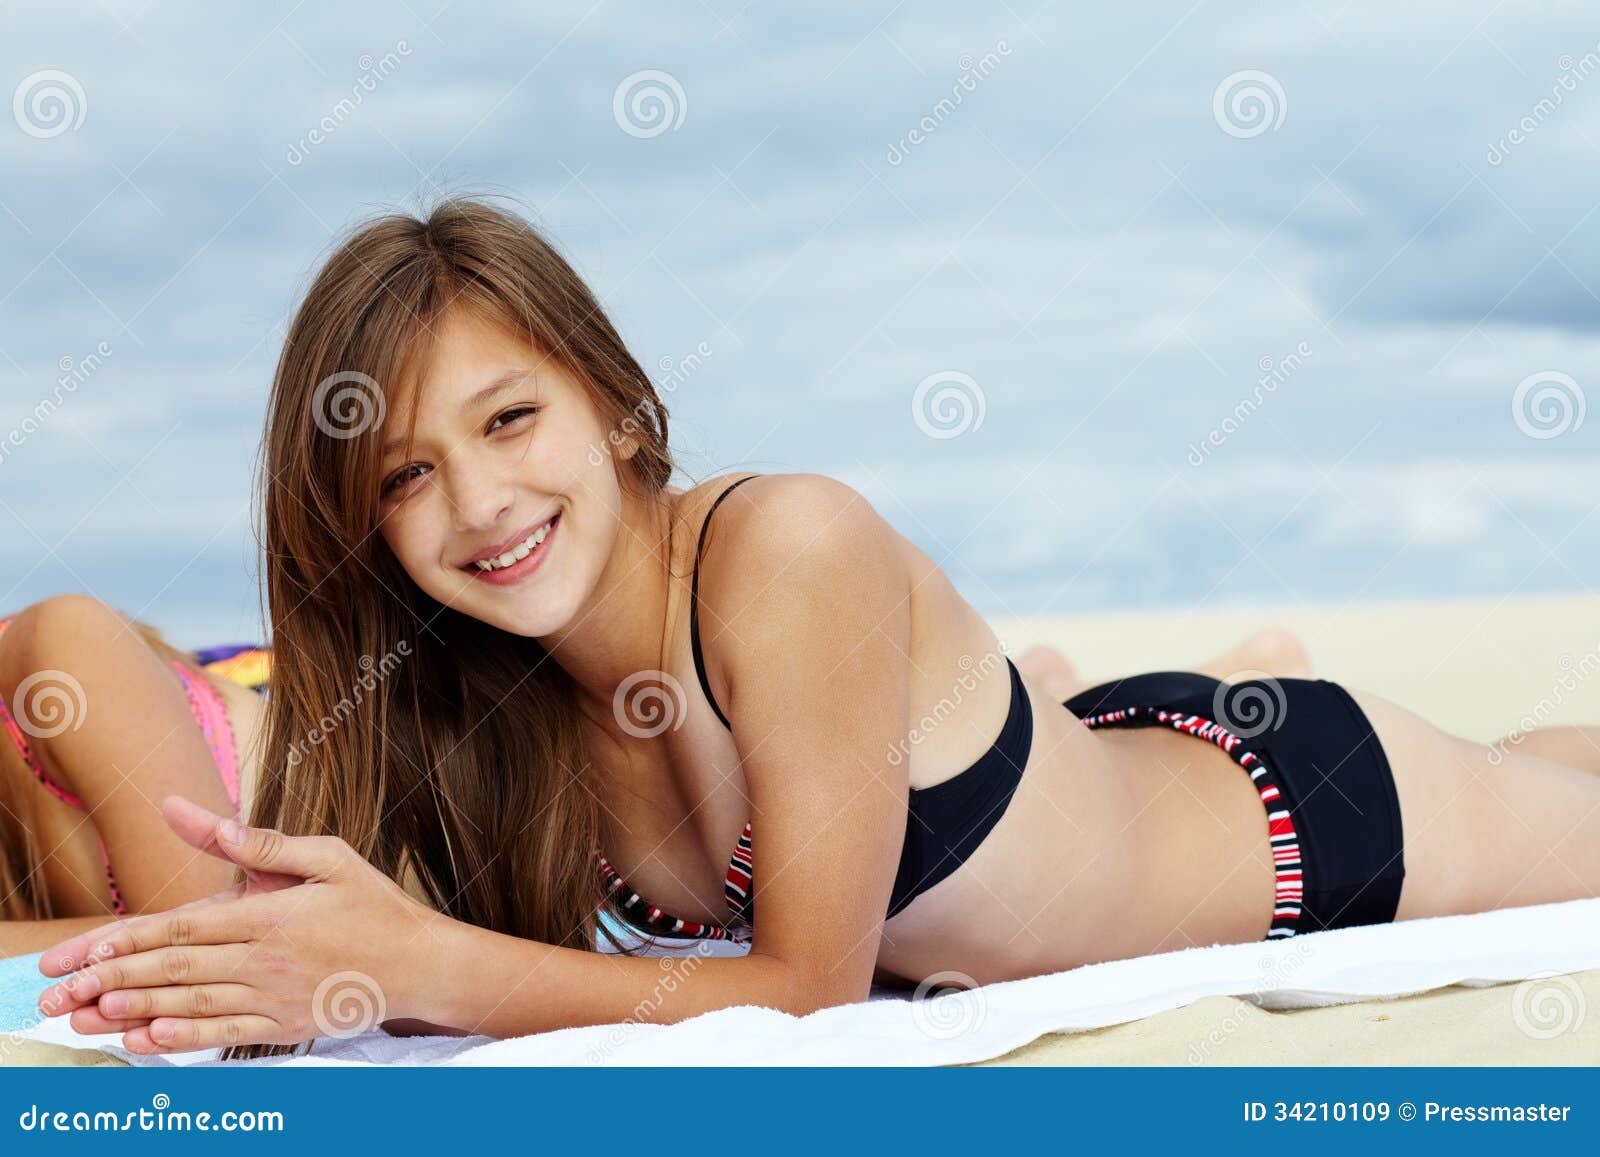 Girl on sand stock image. Image of looking, positive - 34210109